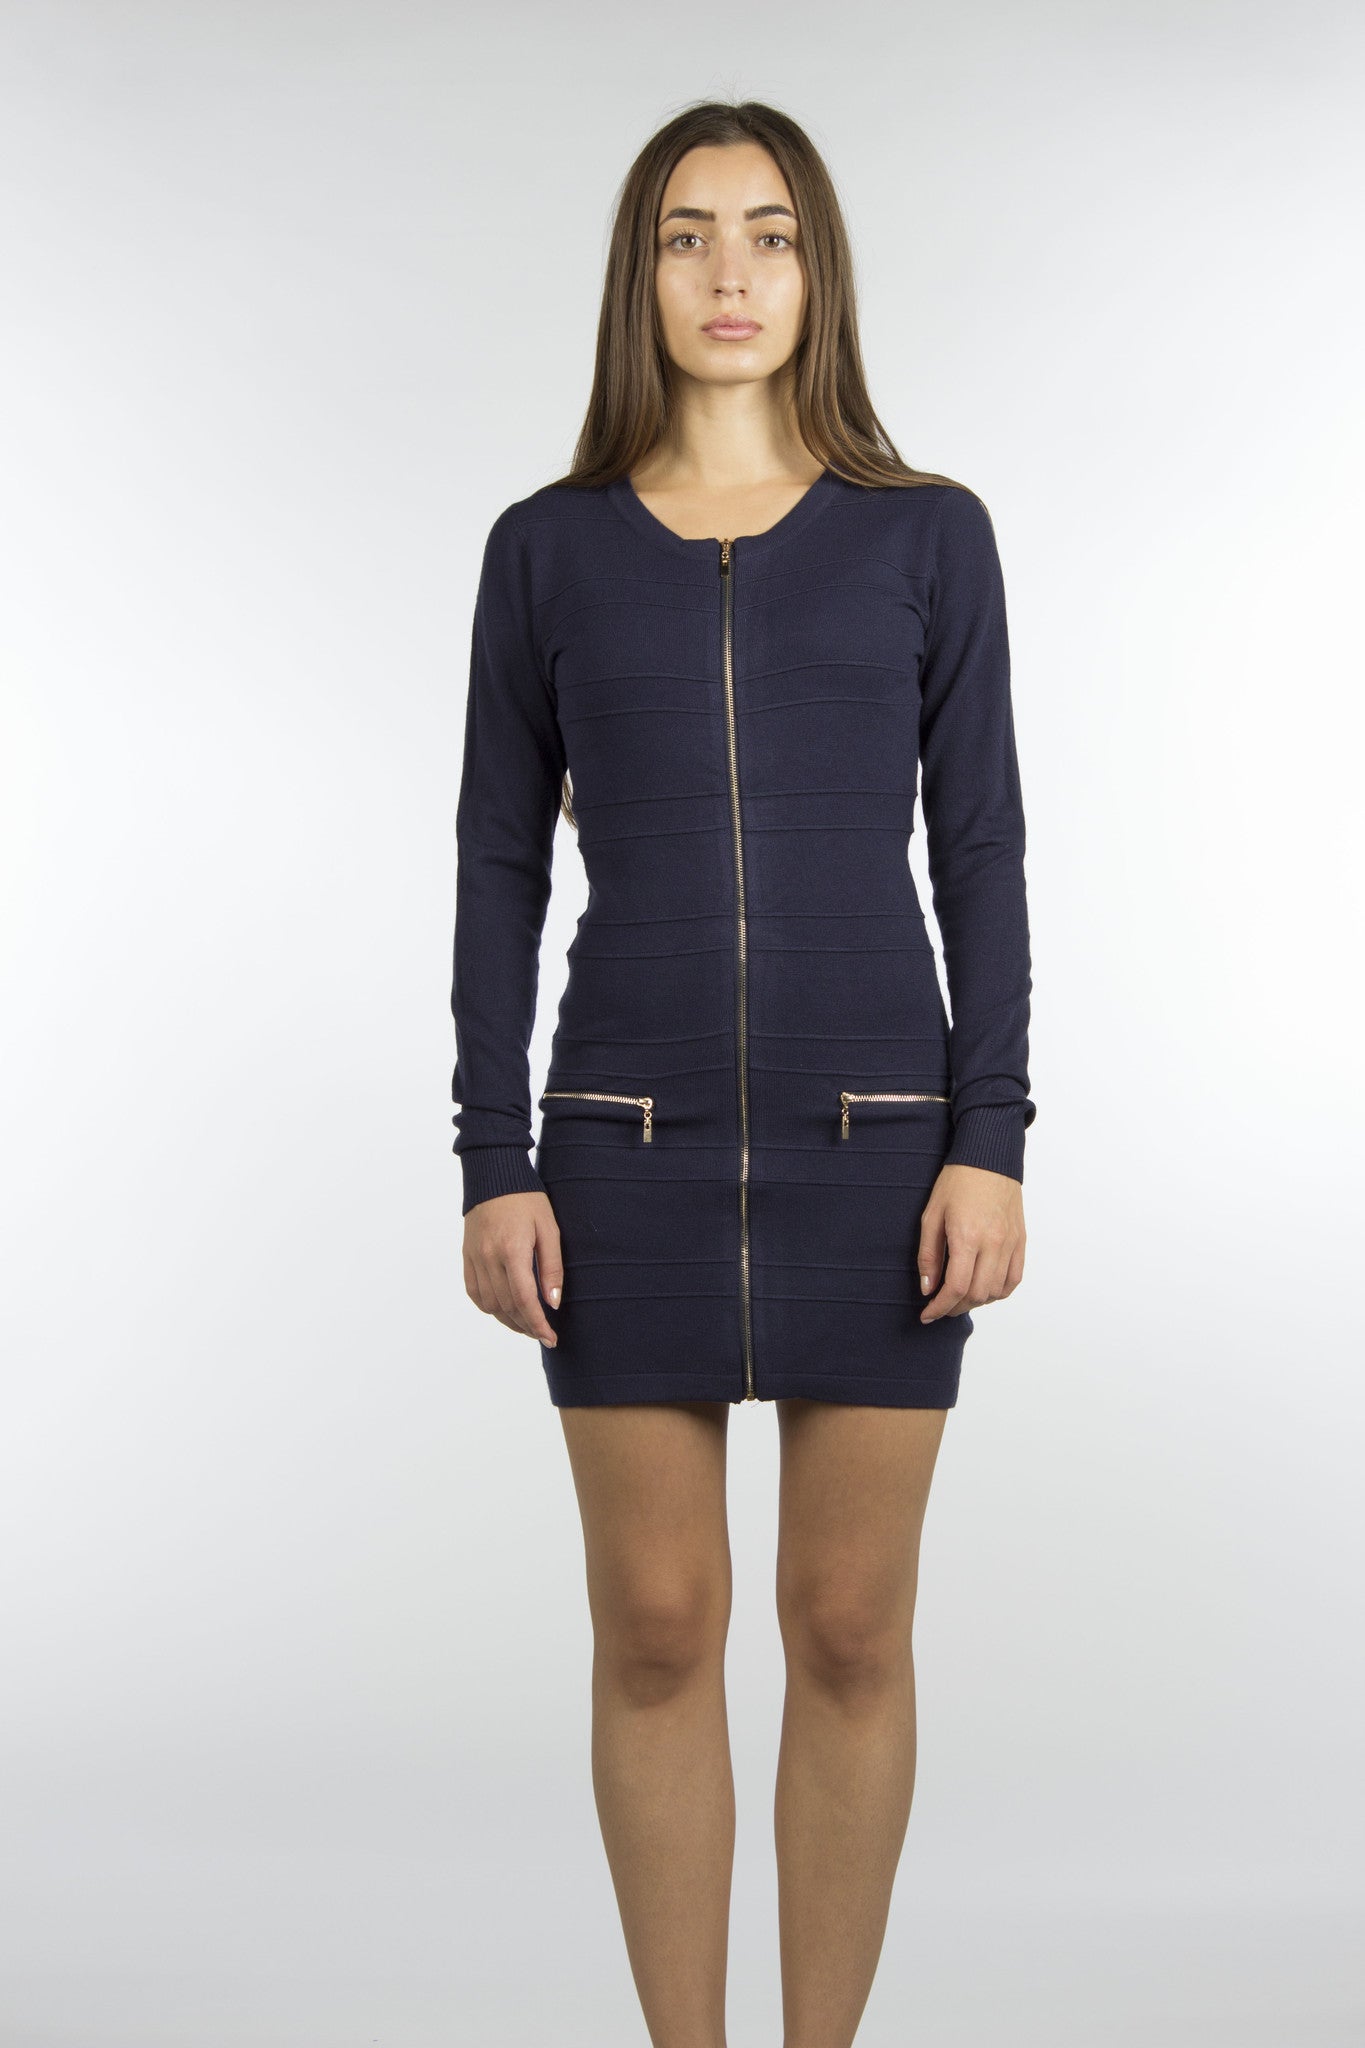 navy dress with front pockets and gold zippers